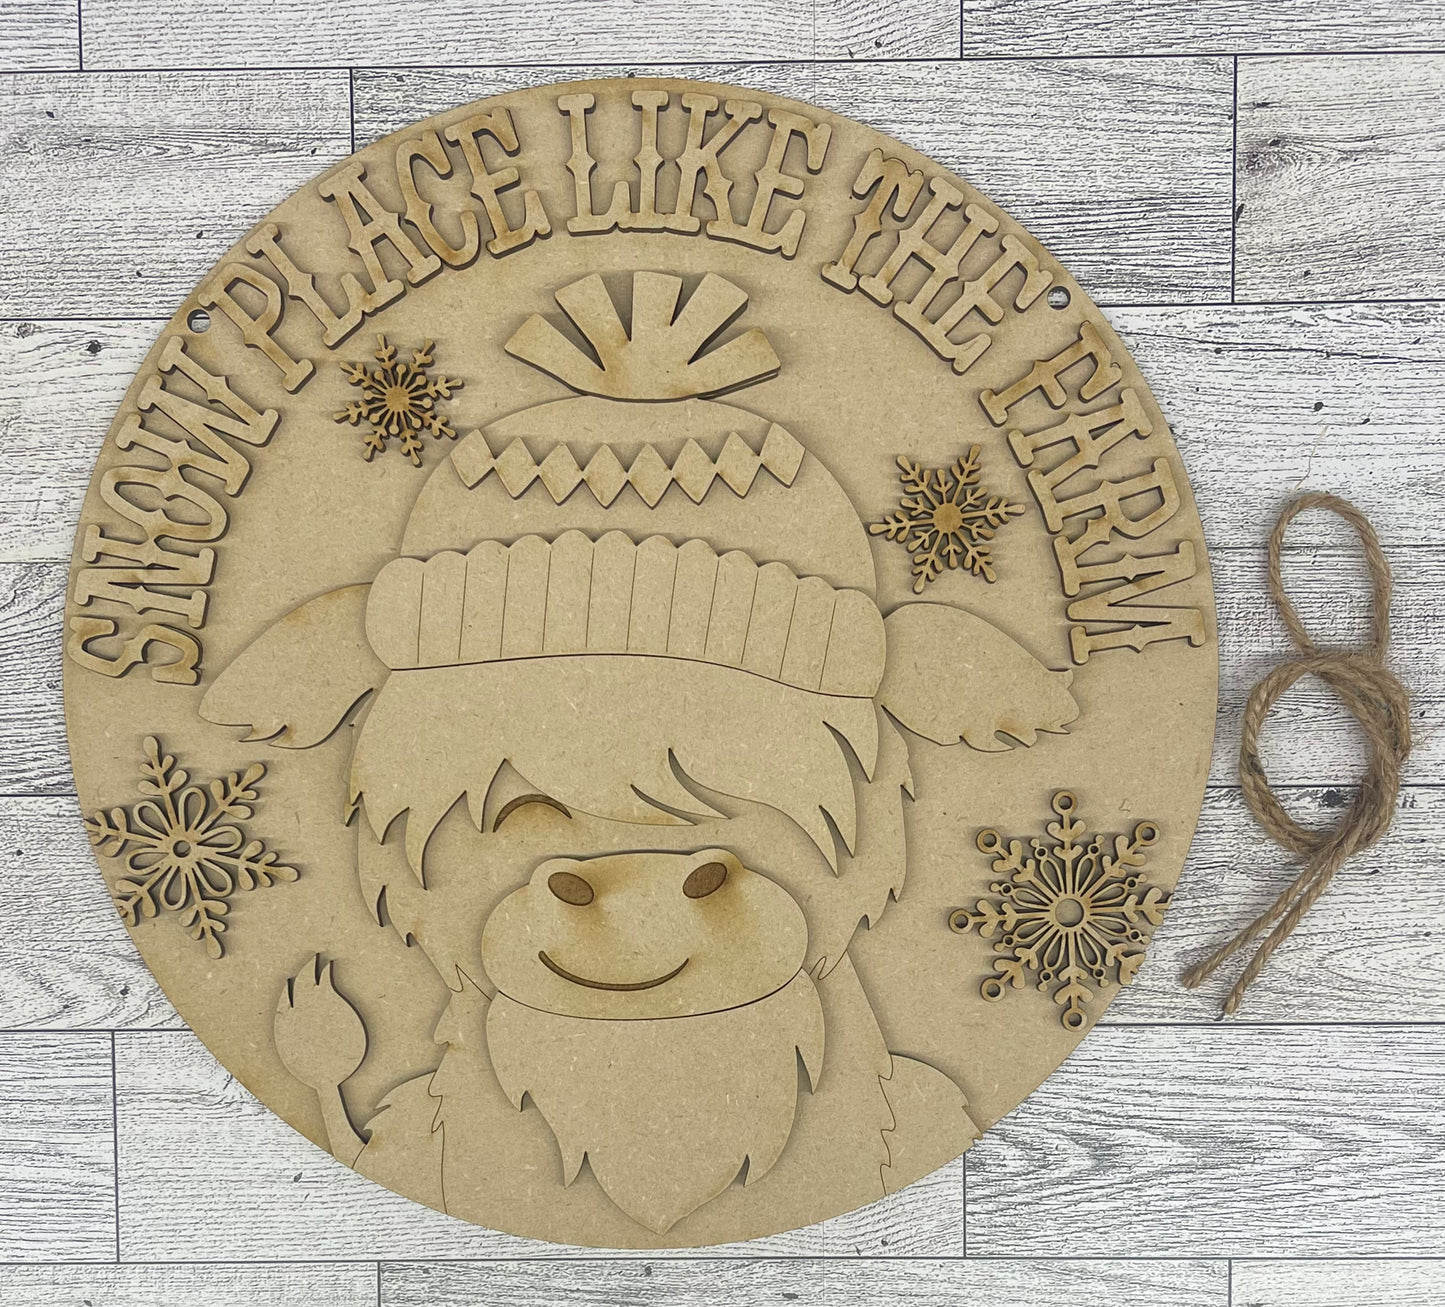 Snow Place line the Farm Highland Cow Door sign wood cutouts, unpainted ready for you to finish